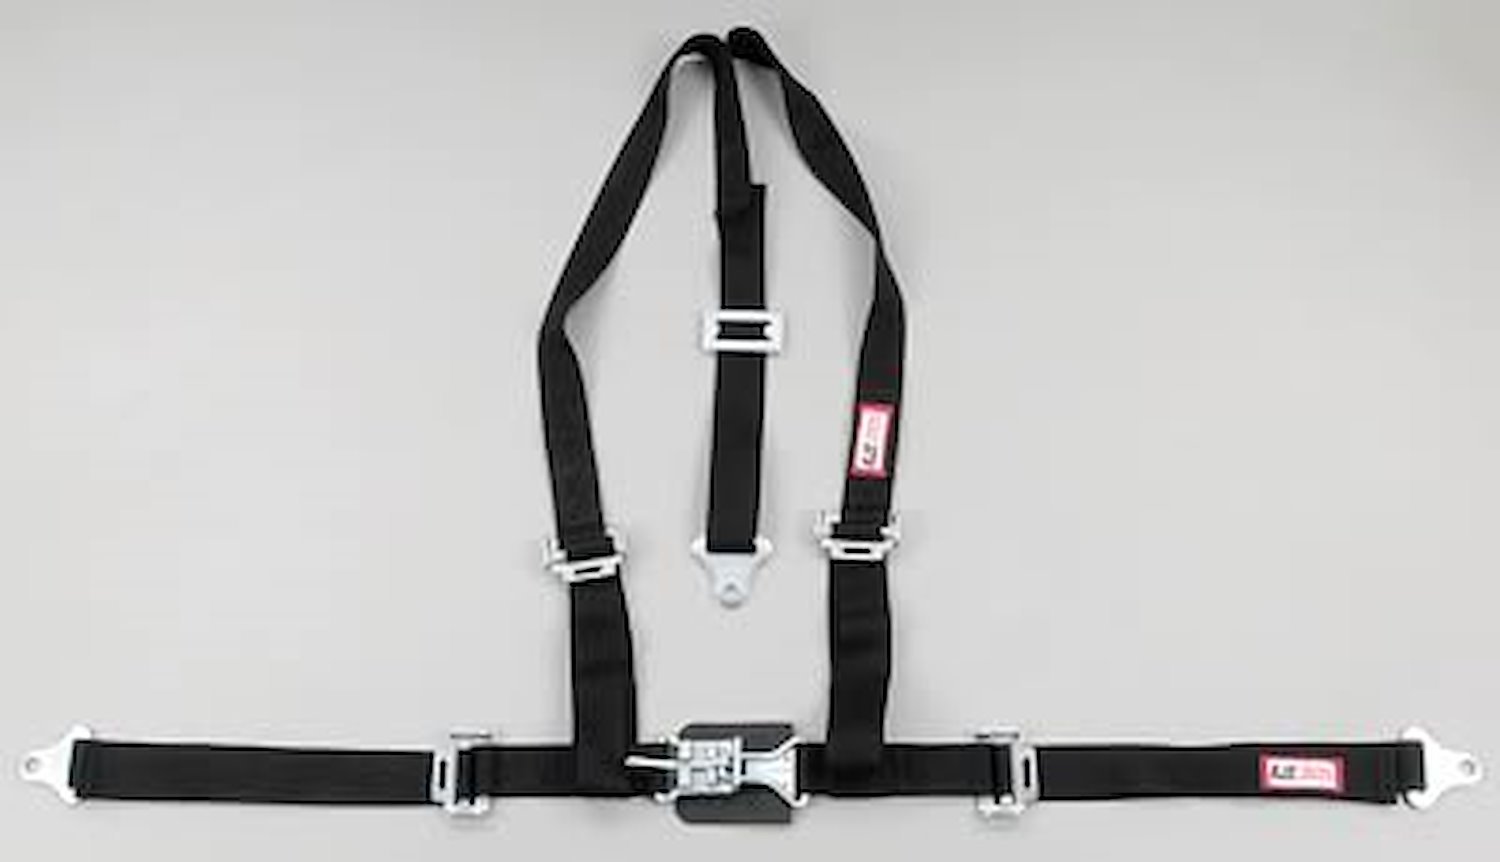 NON-SFI L&L HARNESS 2 PULL UP Lap Belt SEWN IN 2 S.H. V ROLL BAR Mount w/STERNUM STRAP ALL SNAP ENDS BLUE